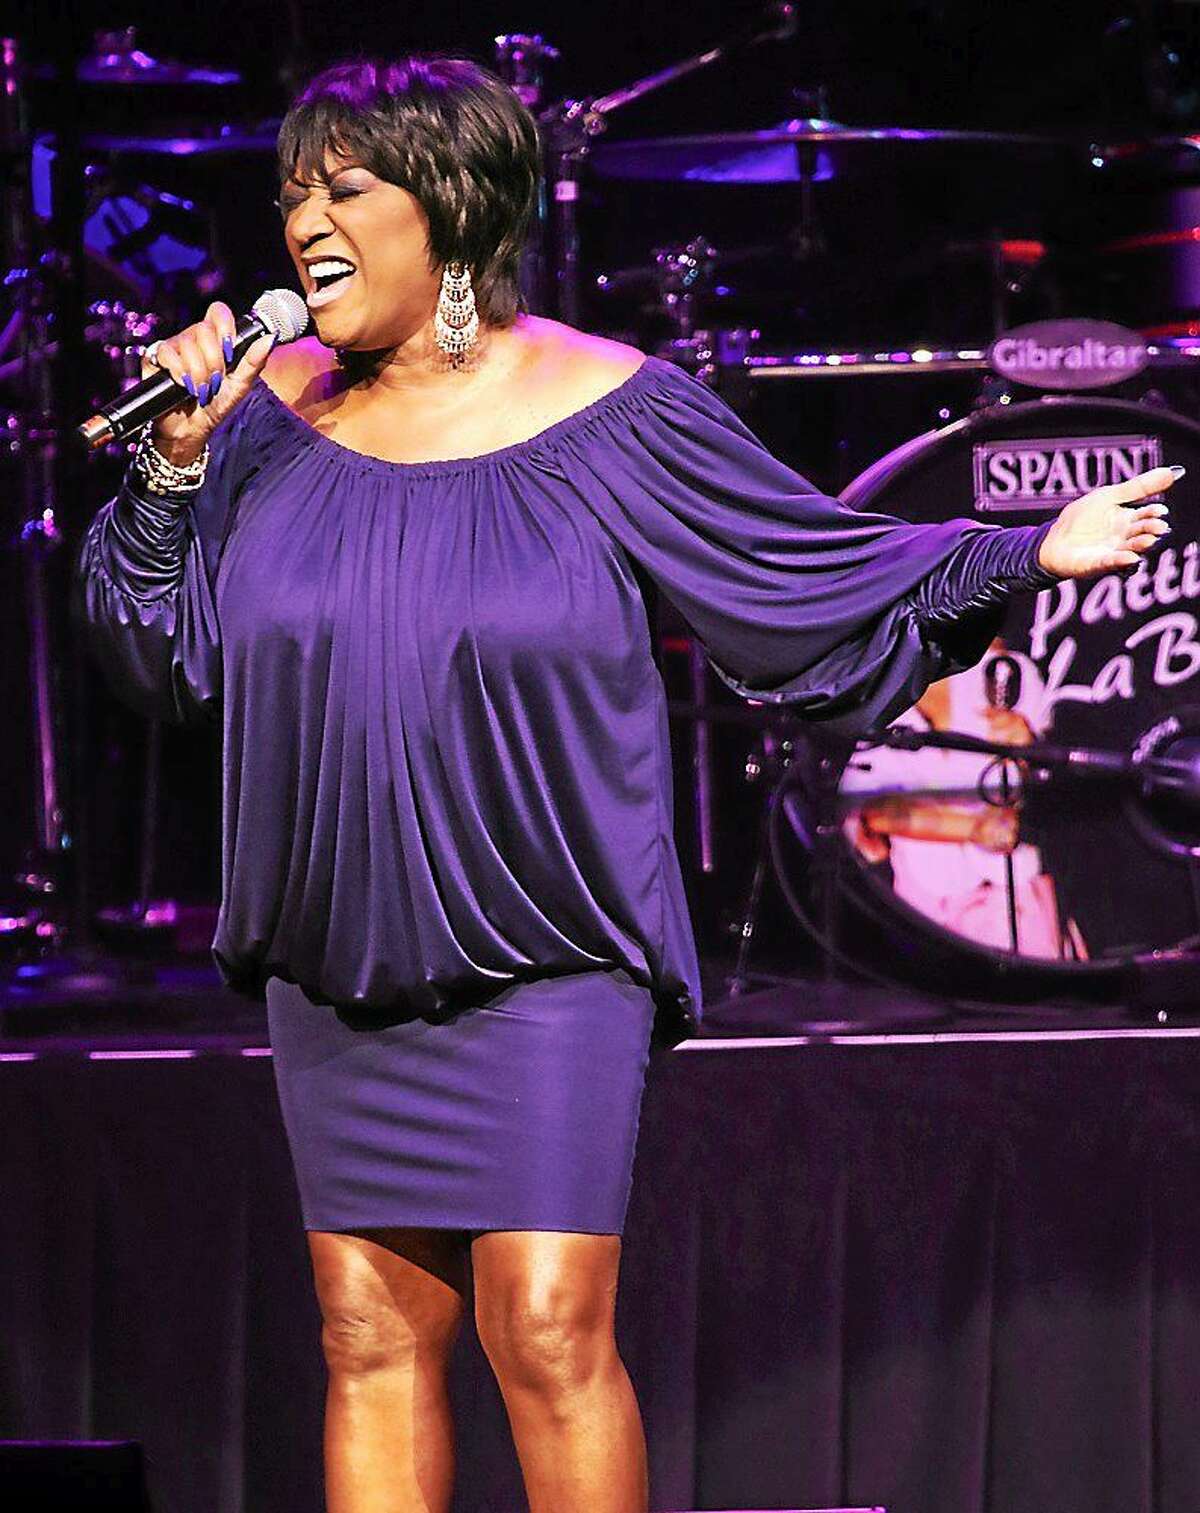 Photo by John Atashian R&B and soul singer, songwriter and actress Patti LaBelle is shown performing on stage during her ìliveî concert appearance at the Foxwoods Resort & Casino on Friday November 21st. At 70 years old with 50 years of entertainment experience, Patti had no problem satisfying the sold out crowd with her biggest hits from over the years.